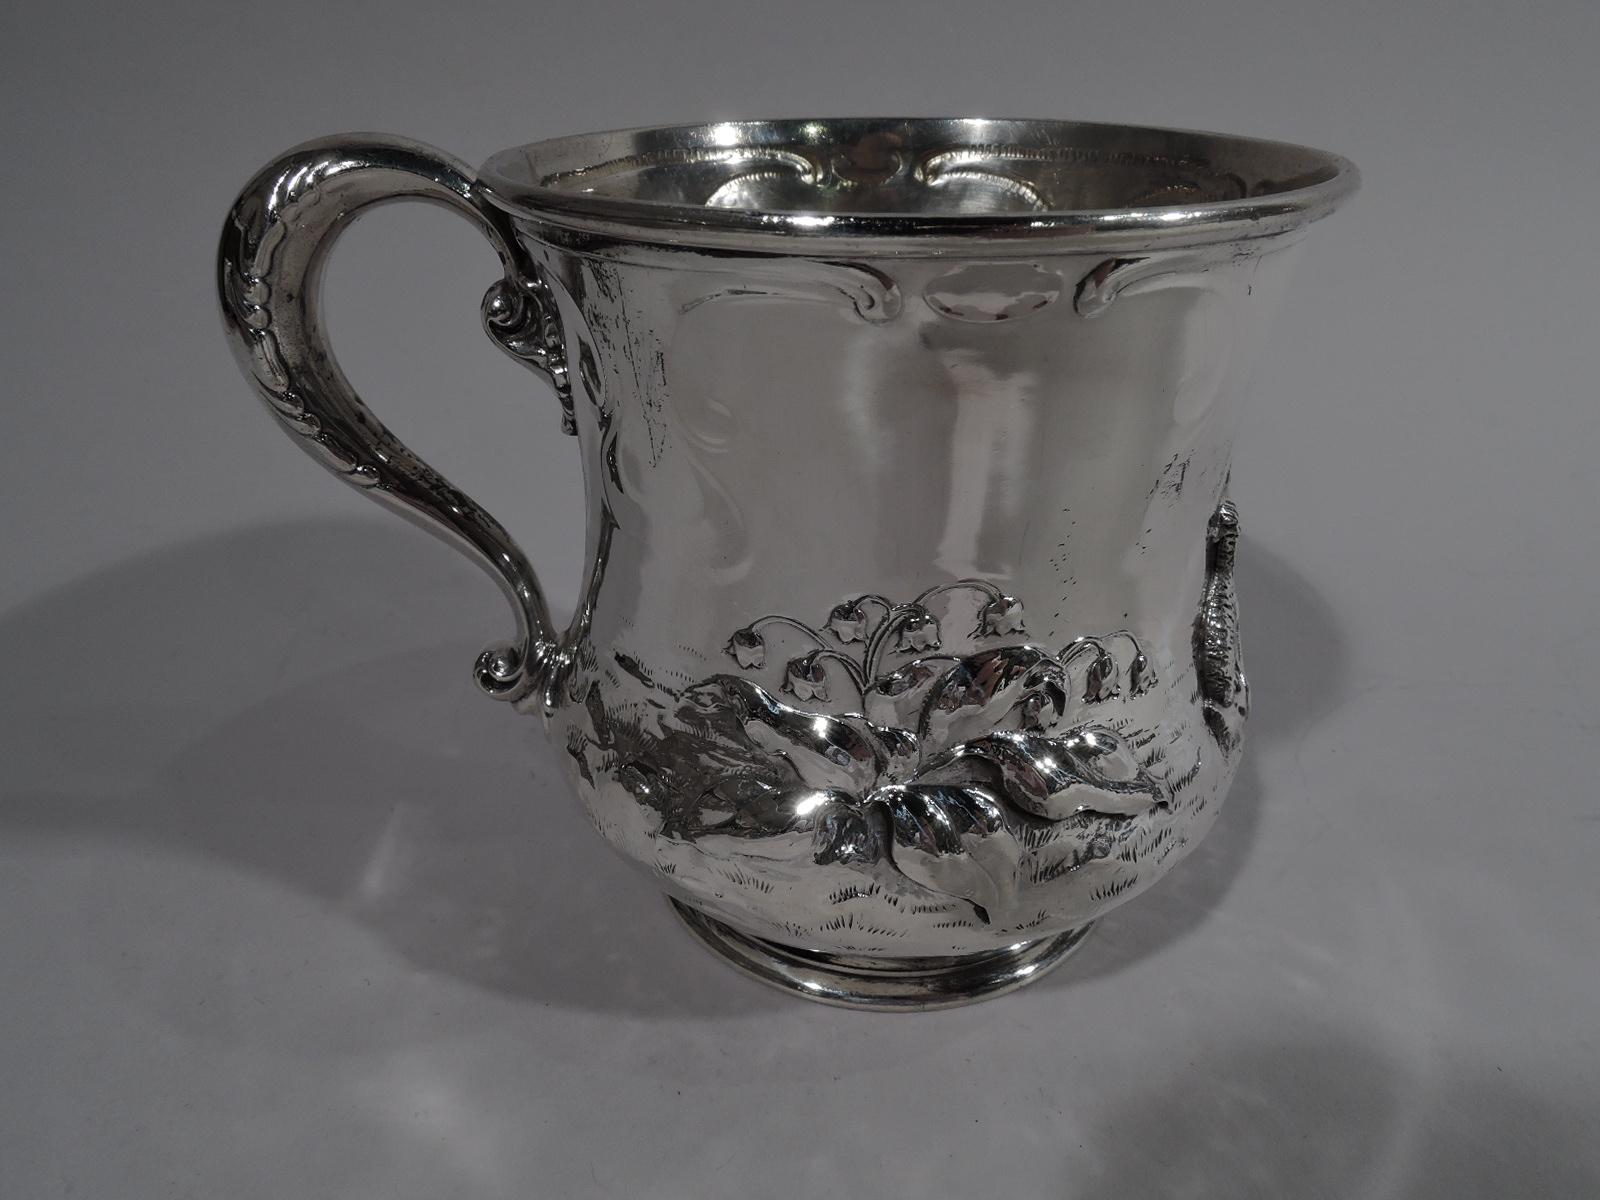 Turn-of-the-century American sterling silver baby cup. Baluster bowl with short inset foot and S-scroll handle. Chased and applied pastoral scene with hussy shepherdess in tightly-laced bodice and flowery hat sitting cross-legged between lamb and